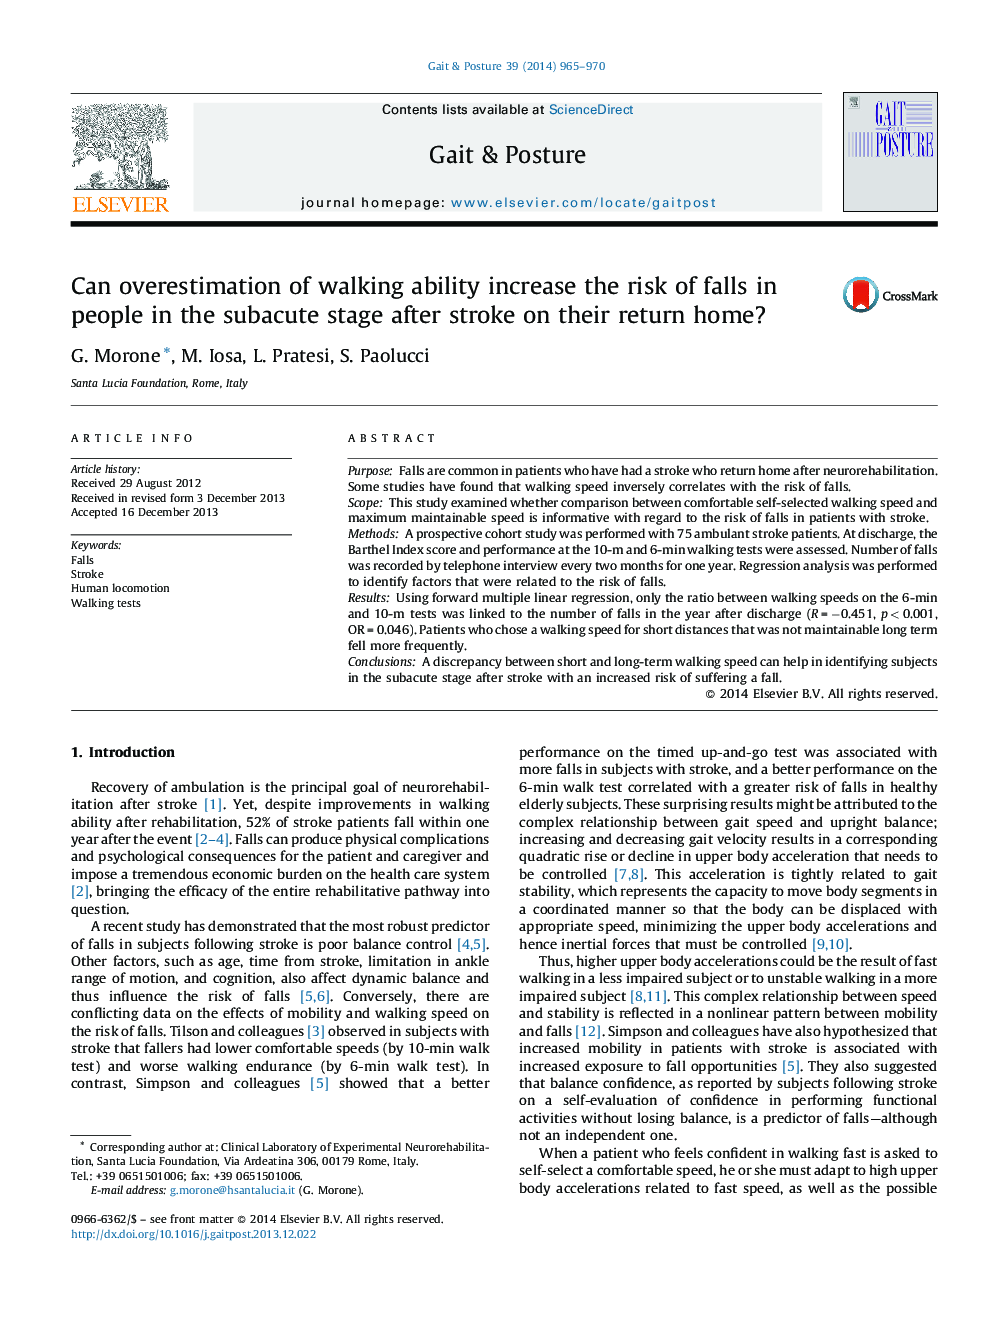 Can overestimation of walking ability increase the risk of falls in people in the subacute stage after stroke on their return home?